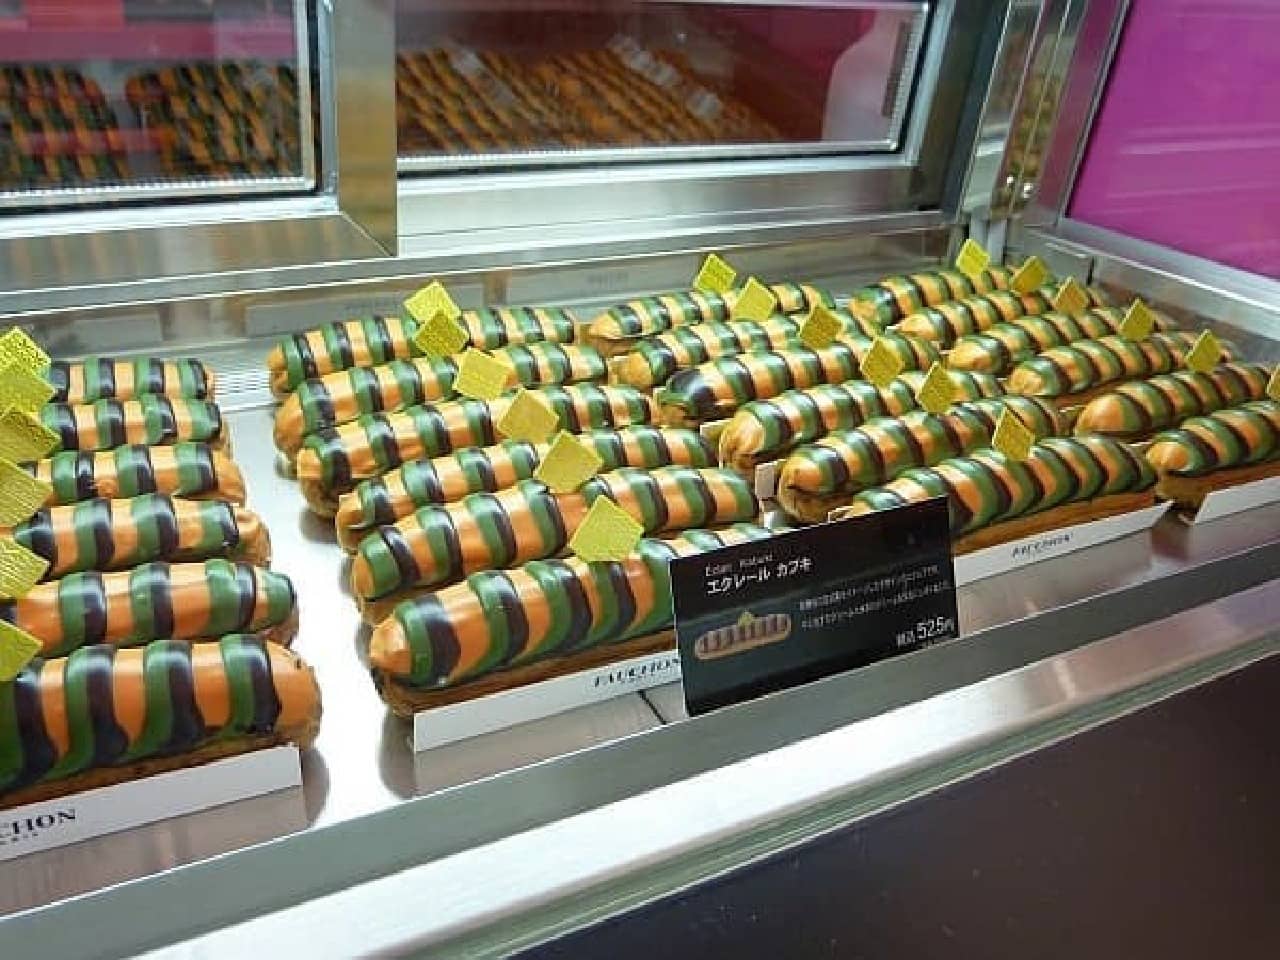 "Eclair Kabuki" section of "Fauchon Mobile Boutique" Eclair Kabuki is lined up in a row